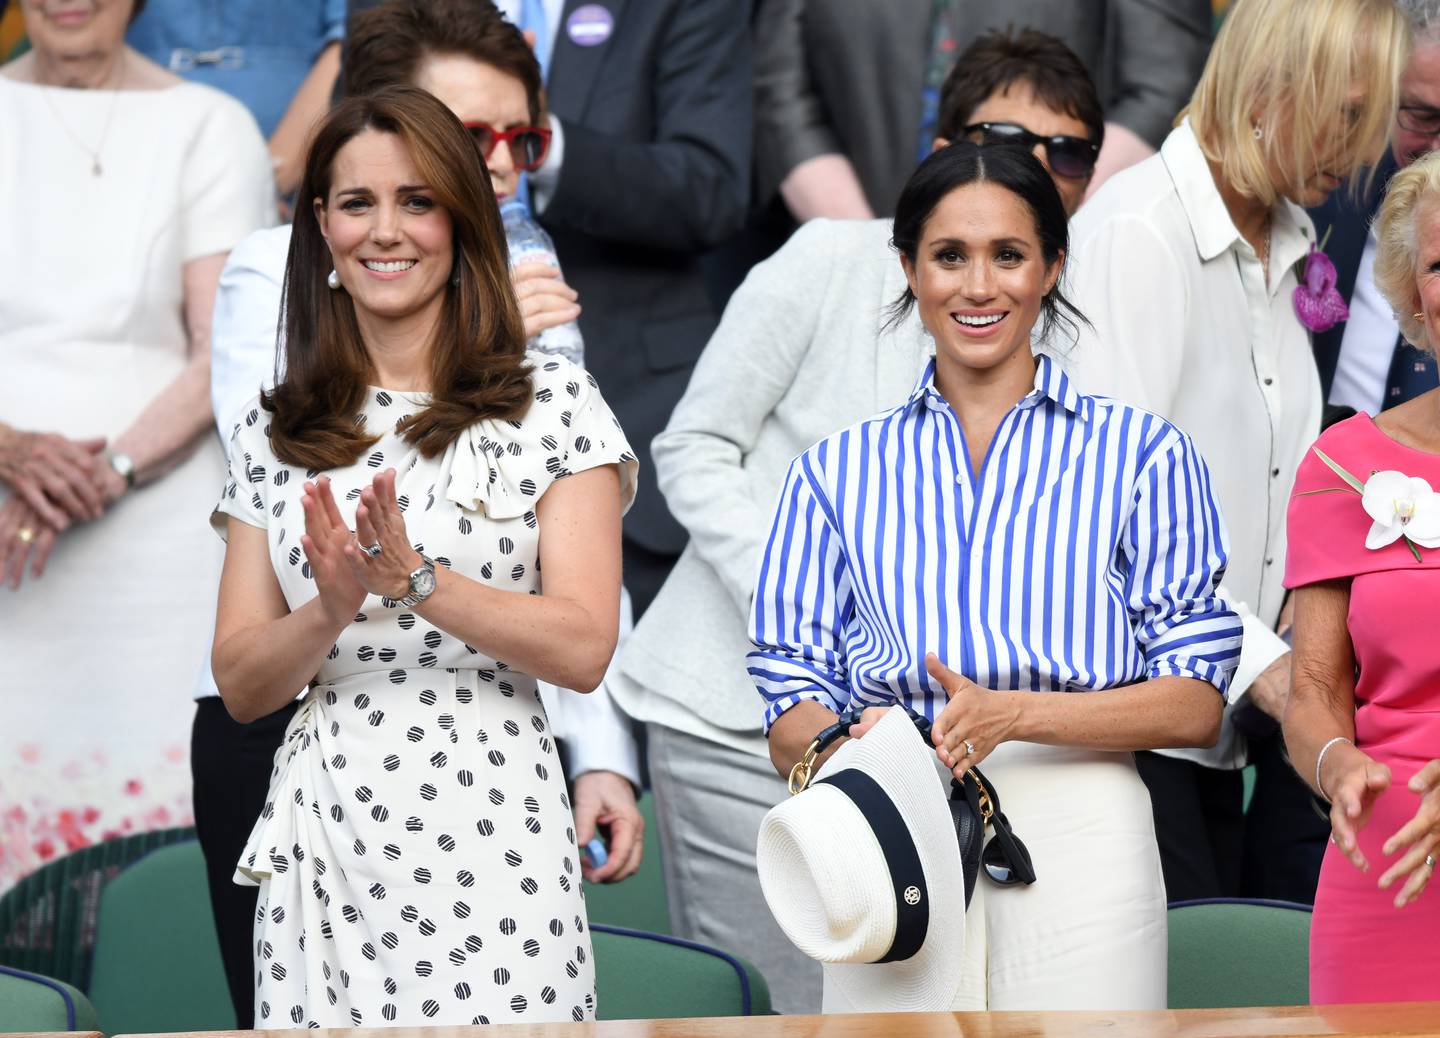 Catherine, Duchess of Cambridge and Meghan, Duchess of Sussex, wield an influence in fashion that few others can compete with